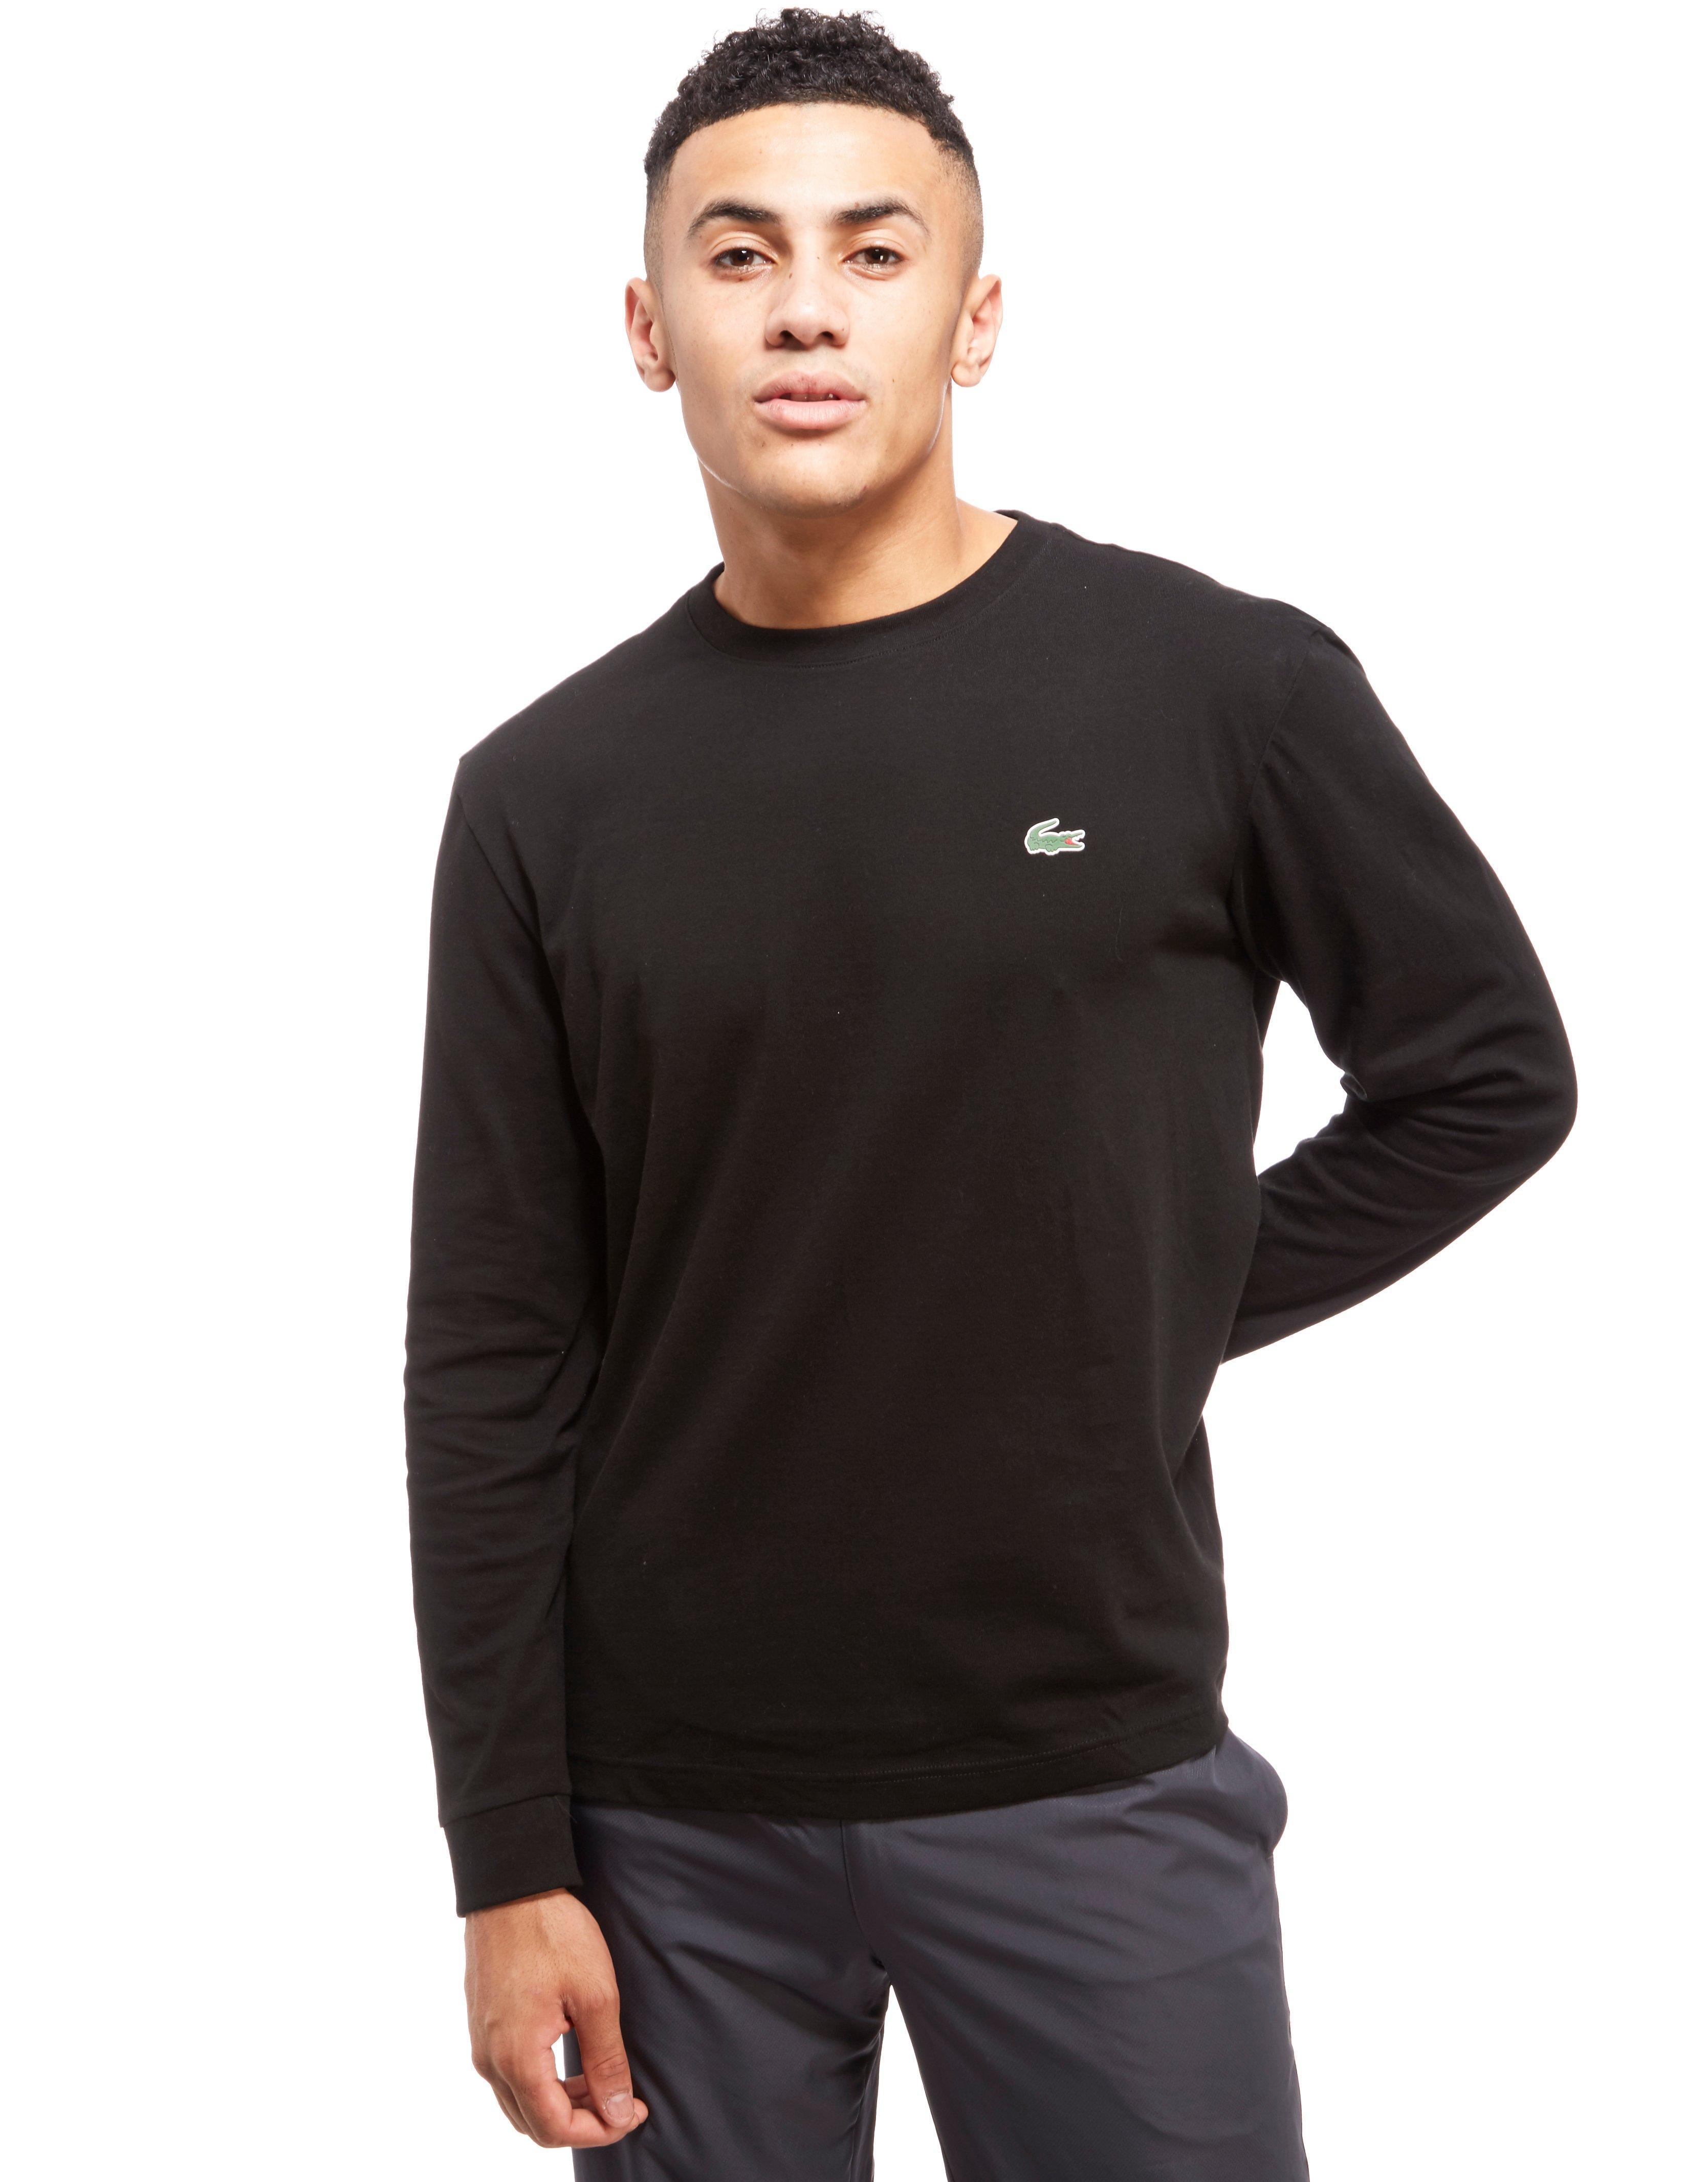 Lacoste Cotton Croc Long-sleeved T-shirt in Black for Men - Lyst